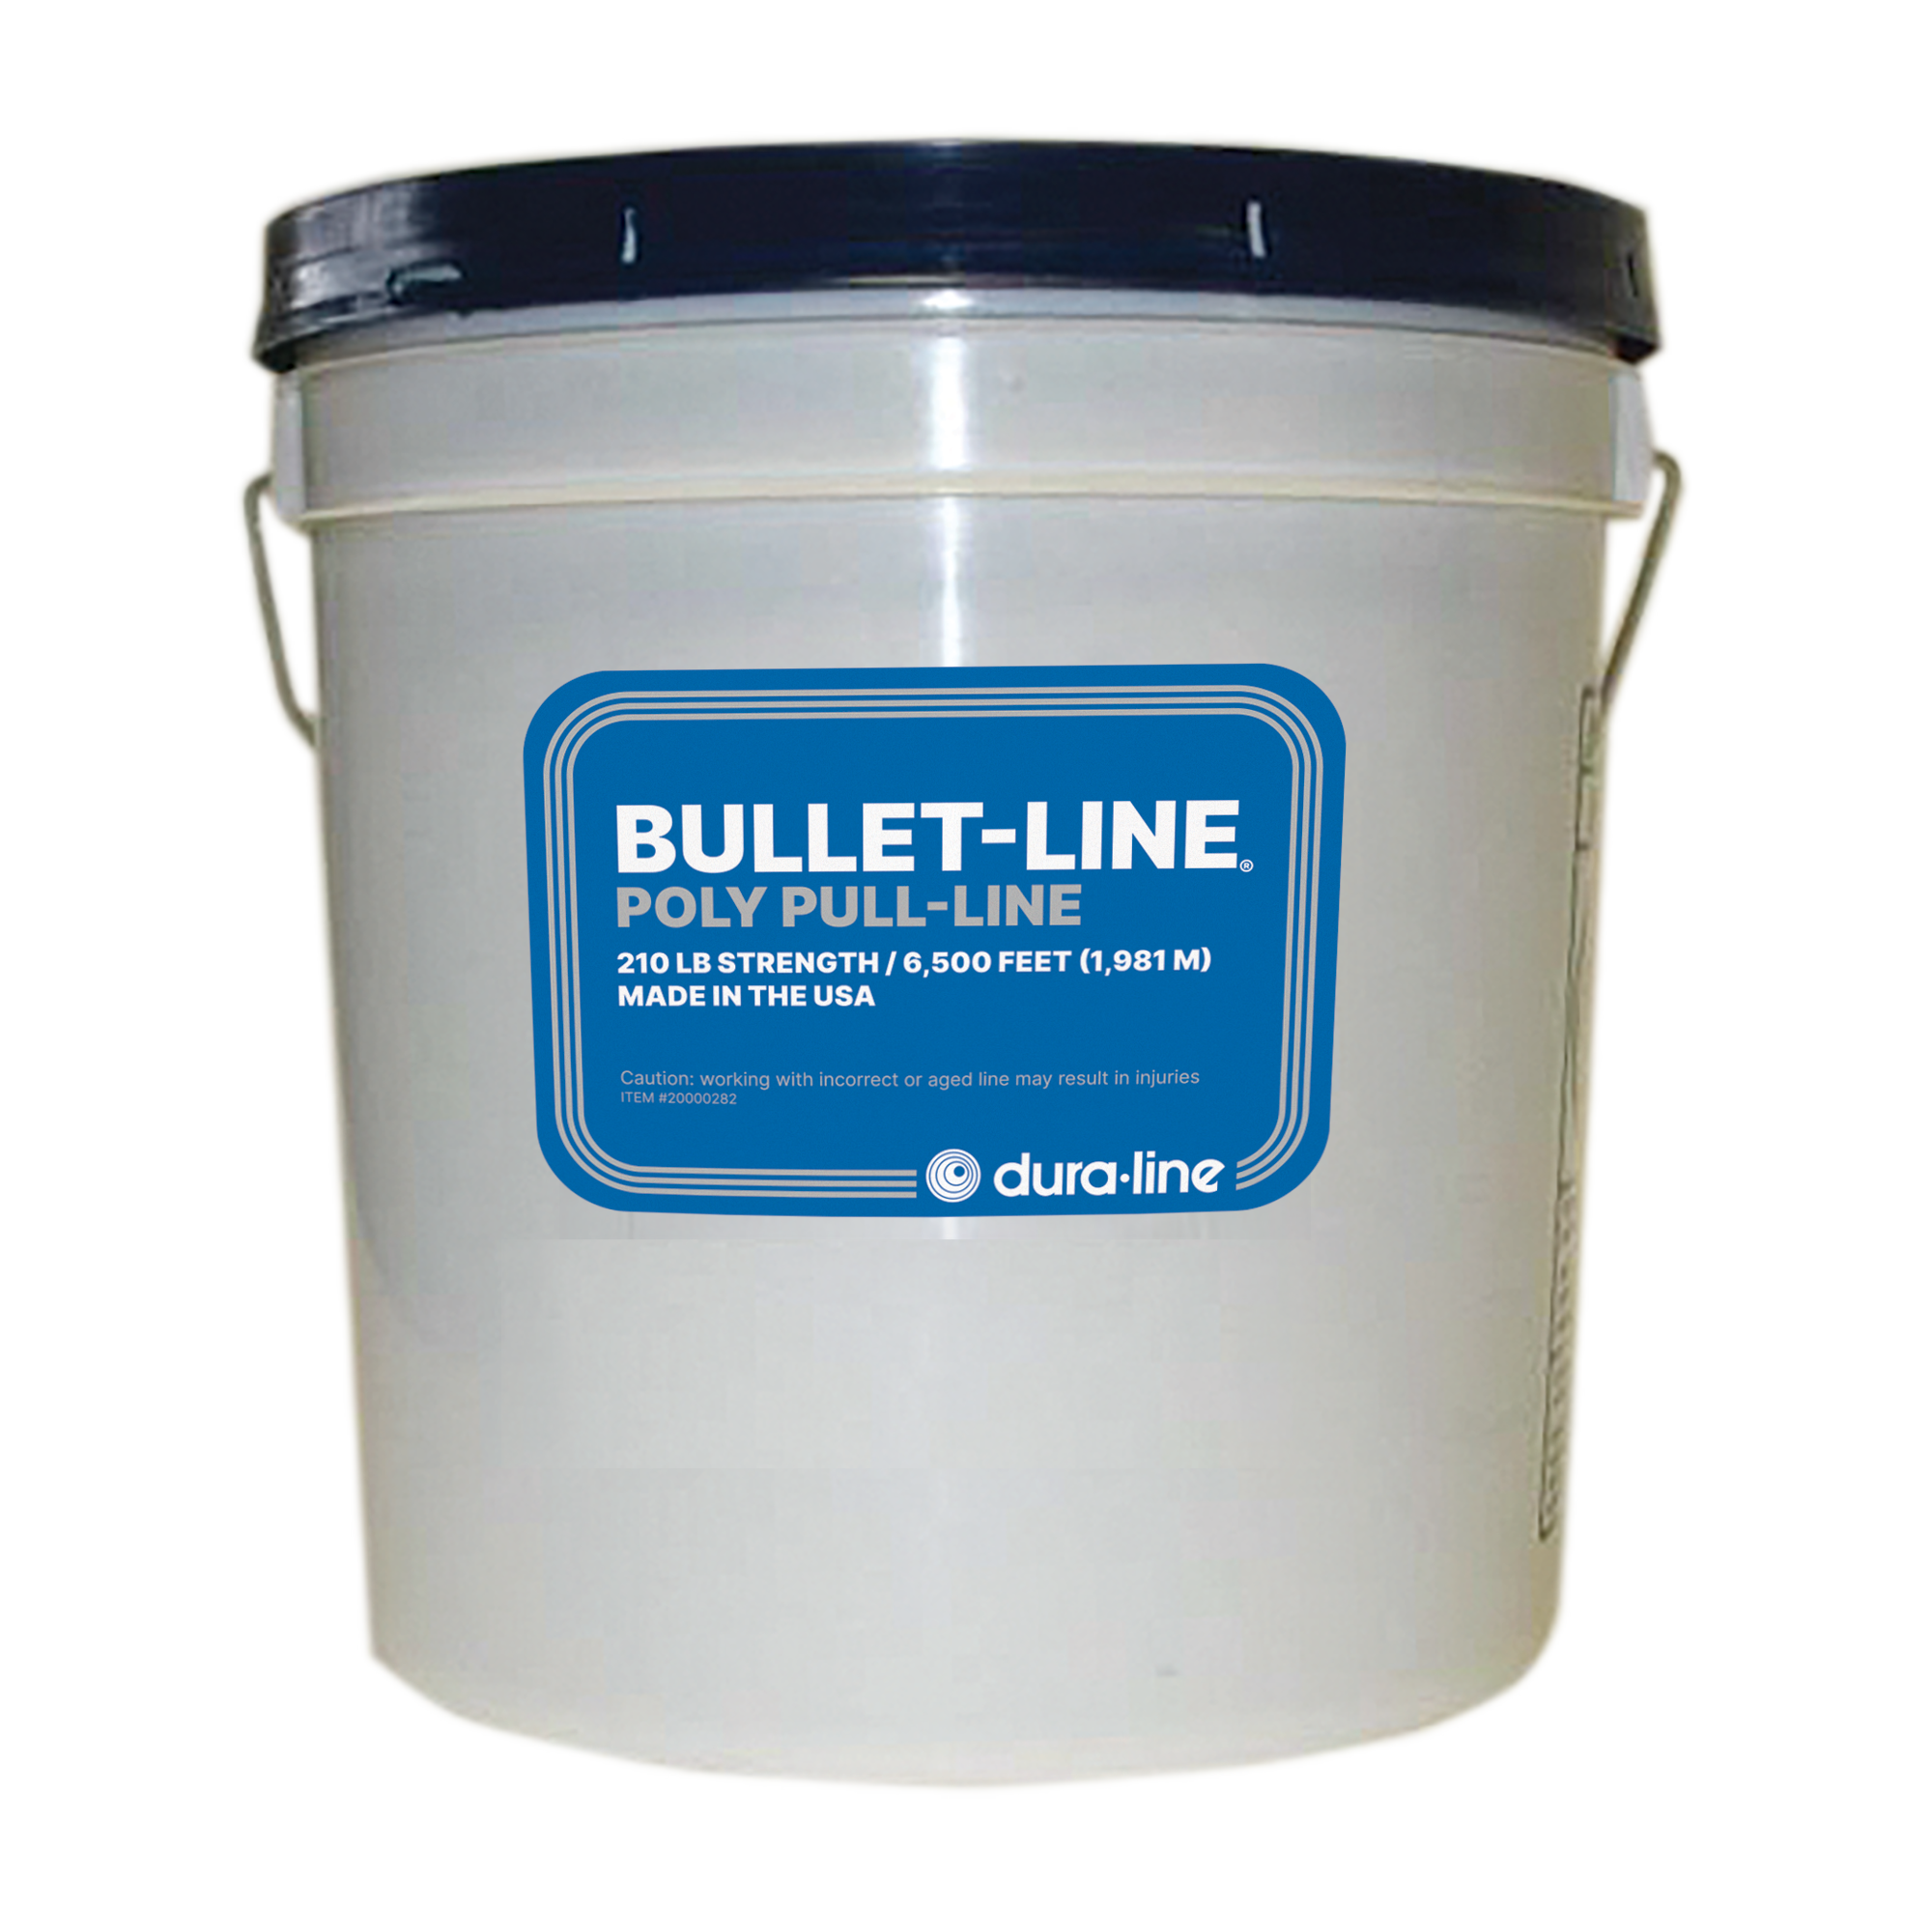 Bullet-Line® is a light poly line used in blowing and pulling applications. The line is rated at 210 lbs. breaking strength and is contained in a plastic dispenser pail. Each pail contains 6,500’ (1,981m) of line.